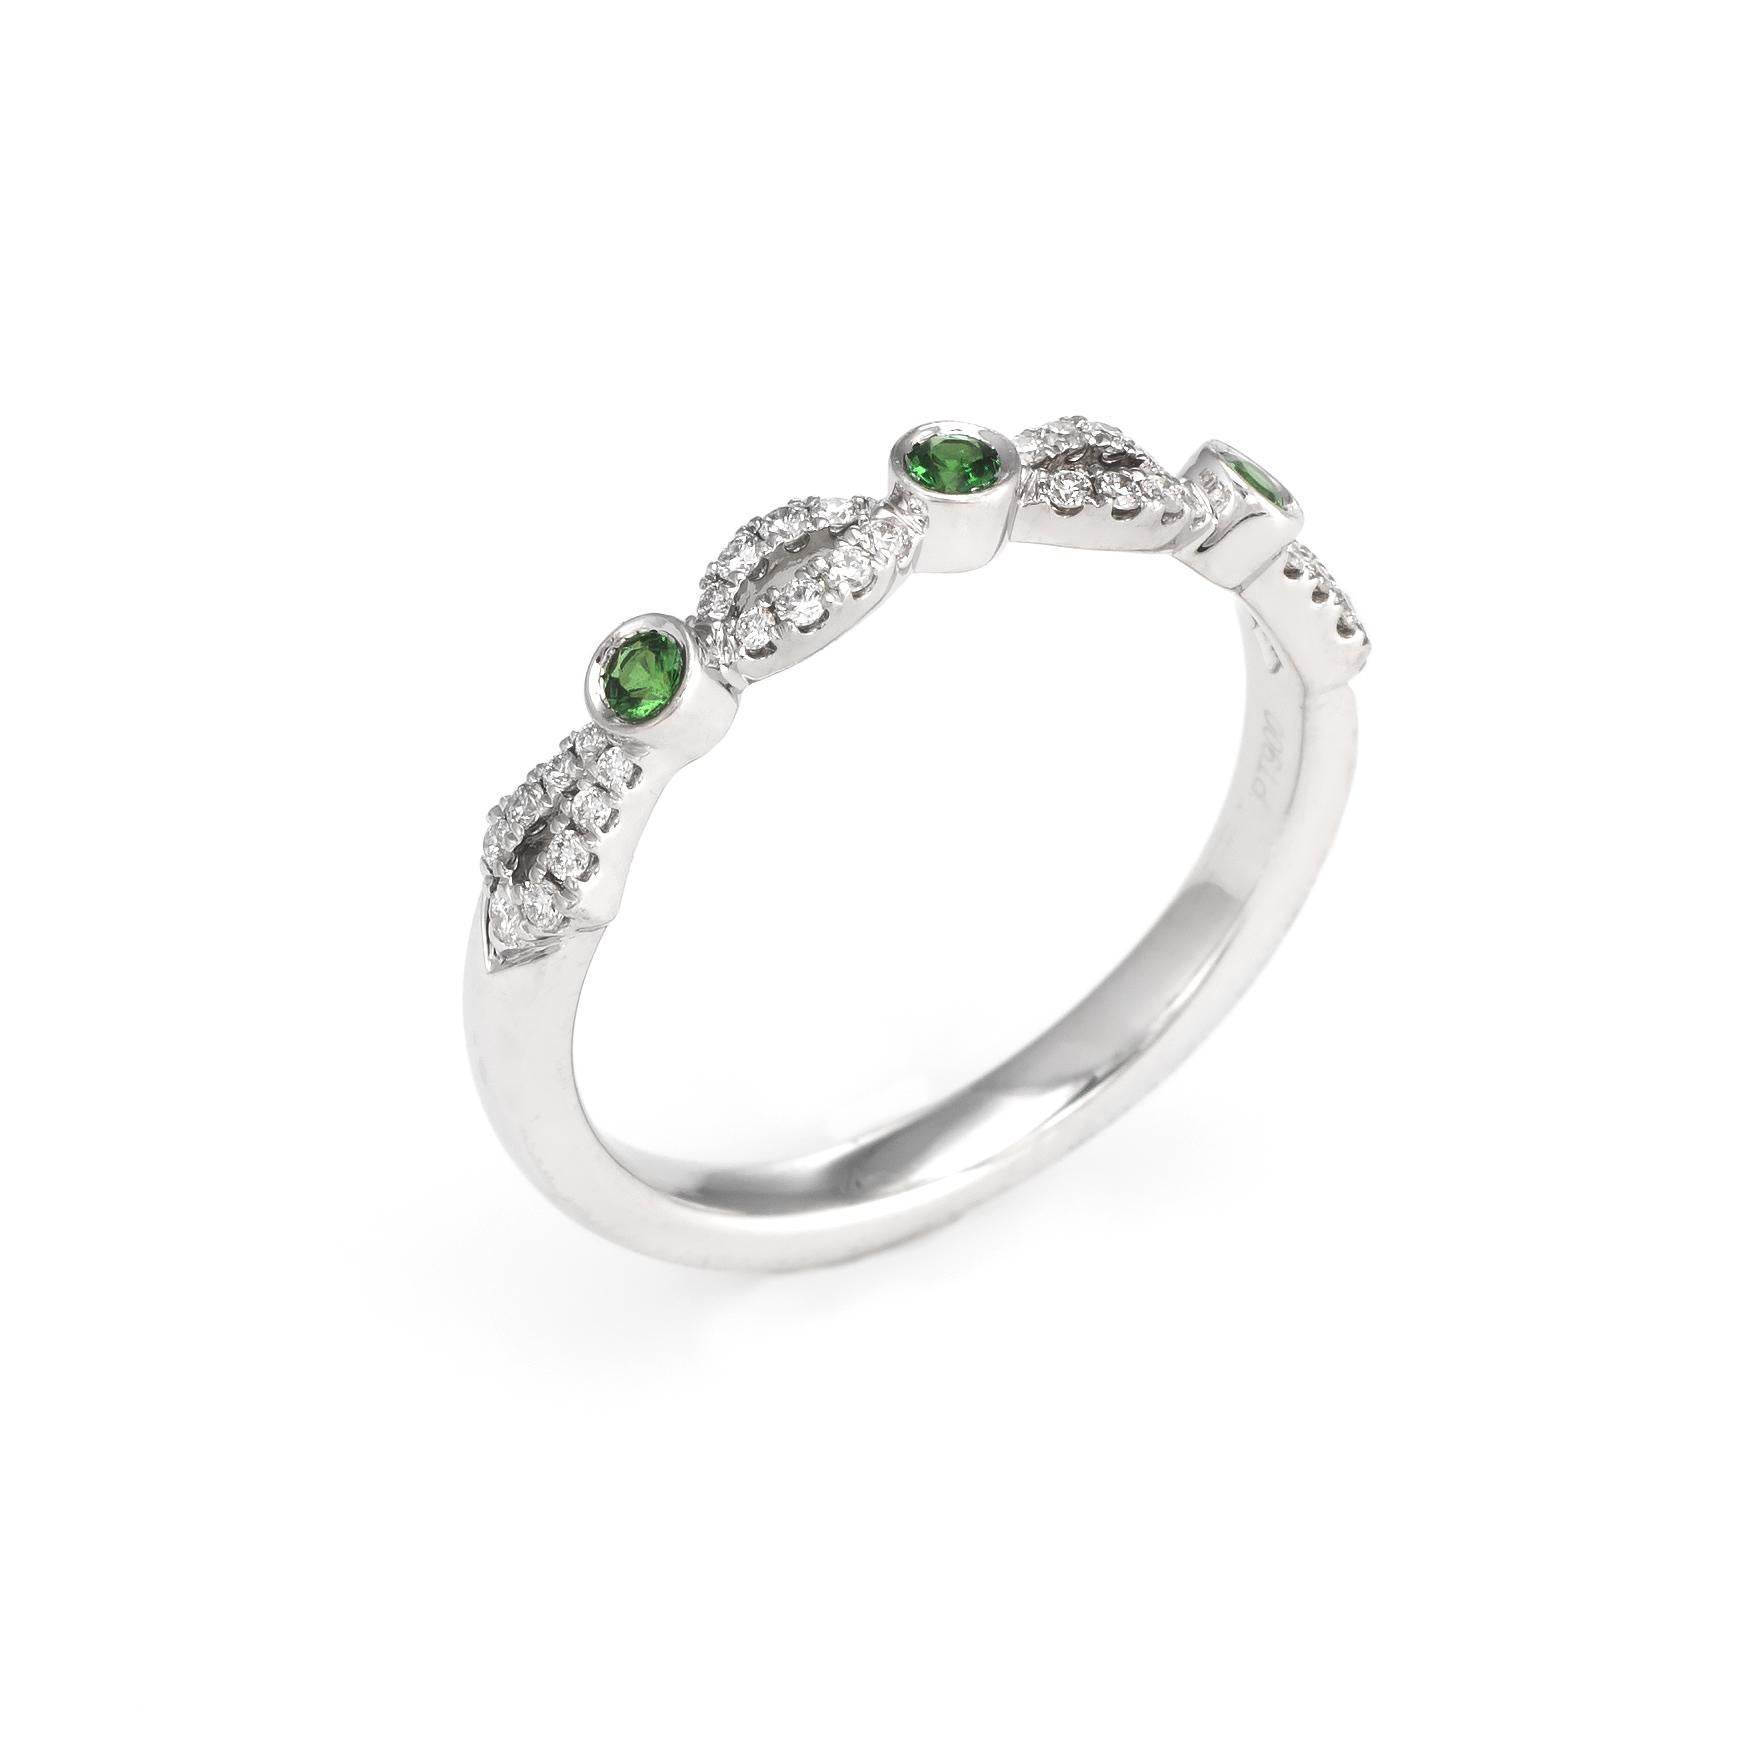 Finely detailed estate Kirk Kara ring, crafted in 900 platinum. 

34 round brilliant cut diamonds total an estimated 0.17 carats (estimated at G-H color and VS2 clarity), accented with three estimated 0.02 carat tsavorite green garnets (0.06 carats